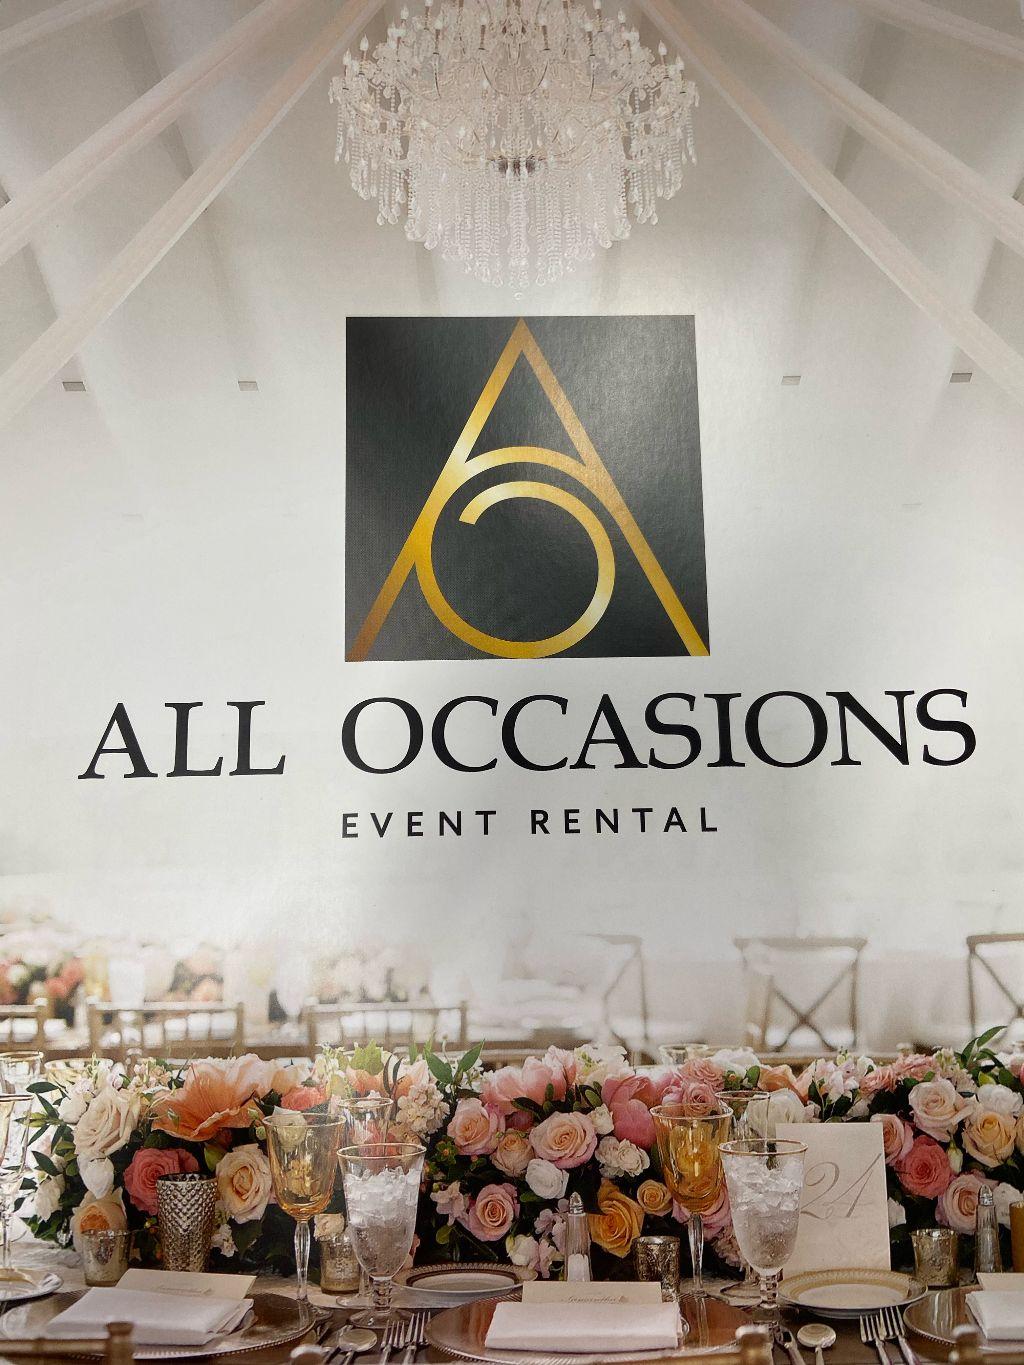 $150 Gift Certificate for All Occasions Event Rental